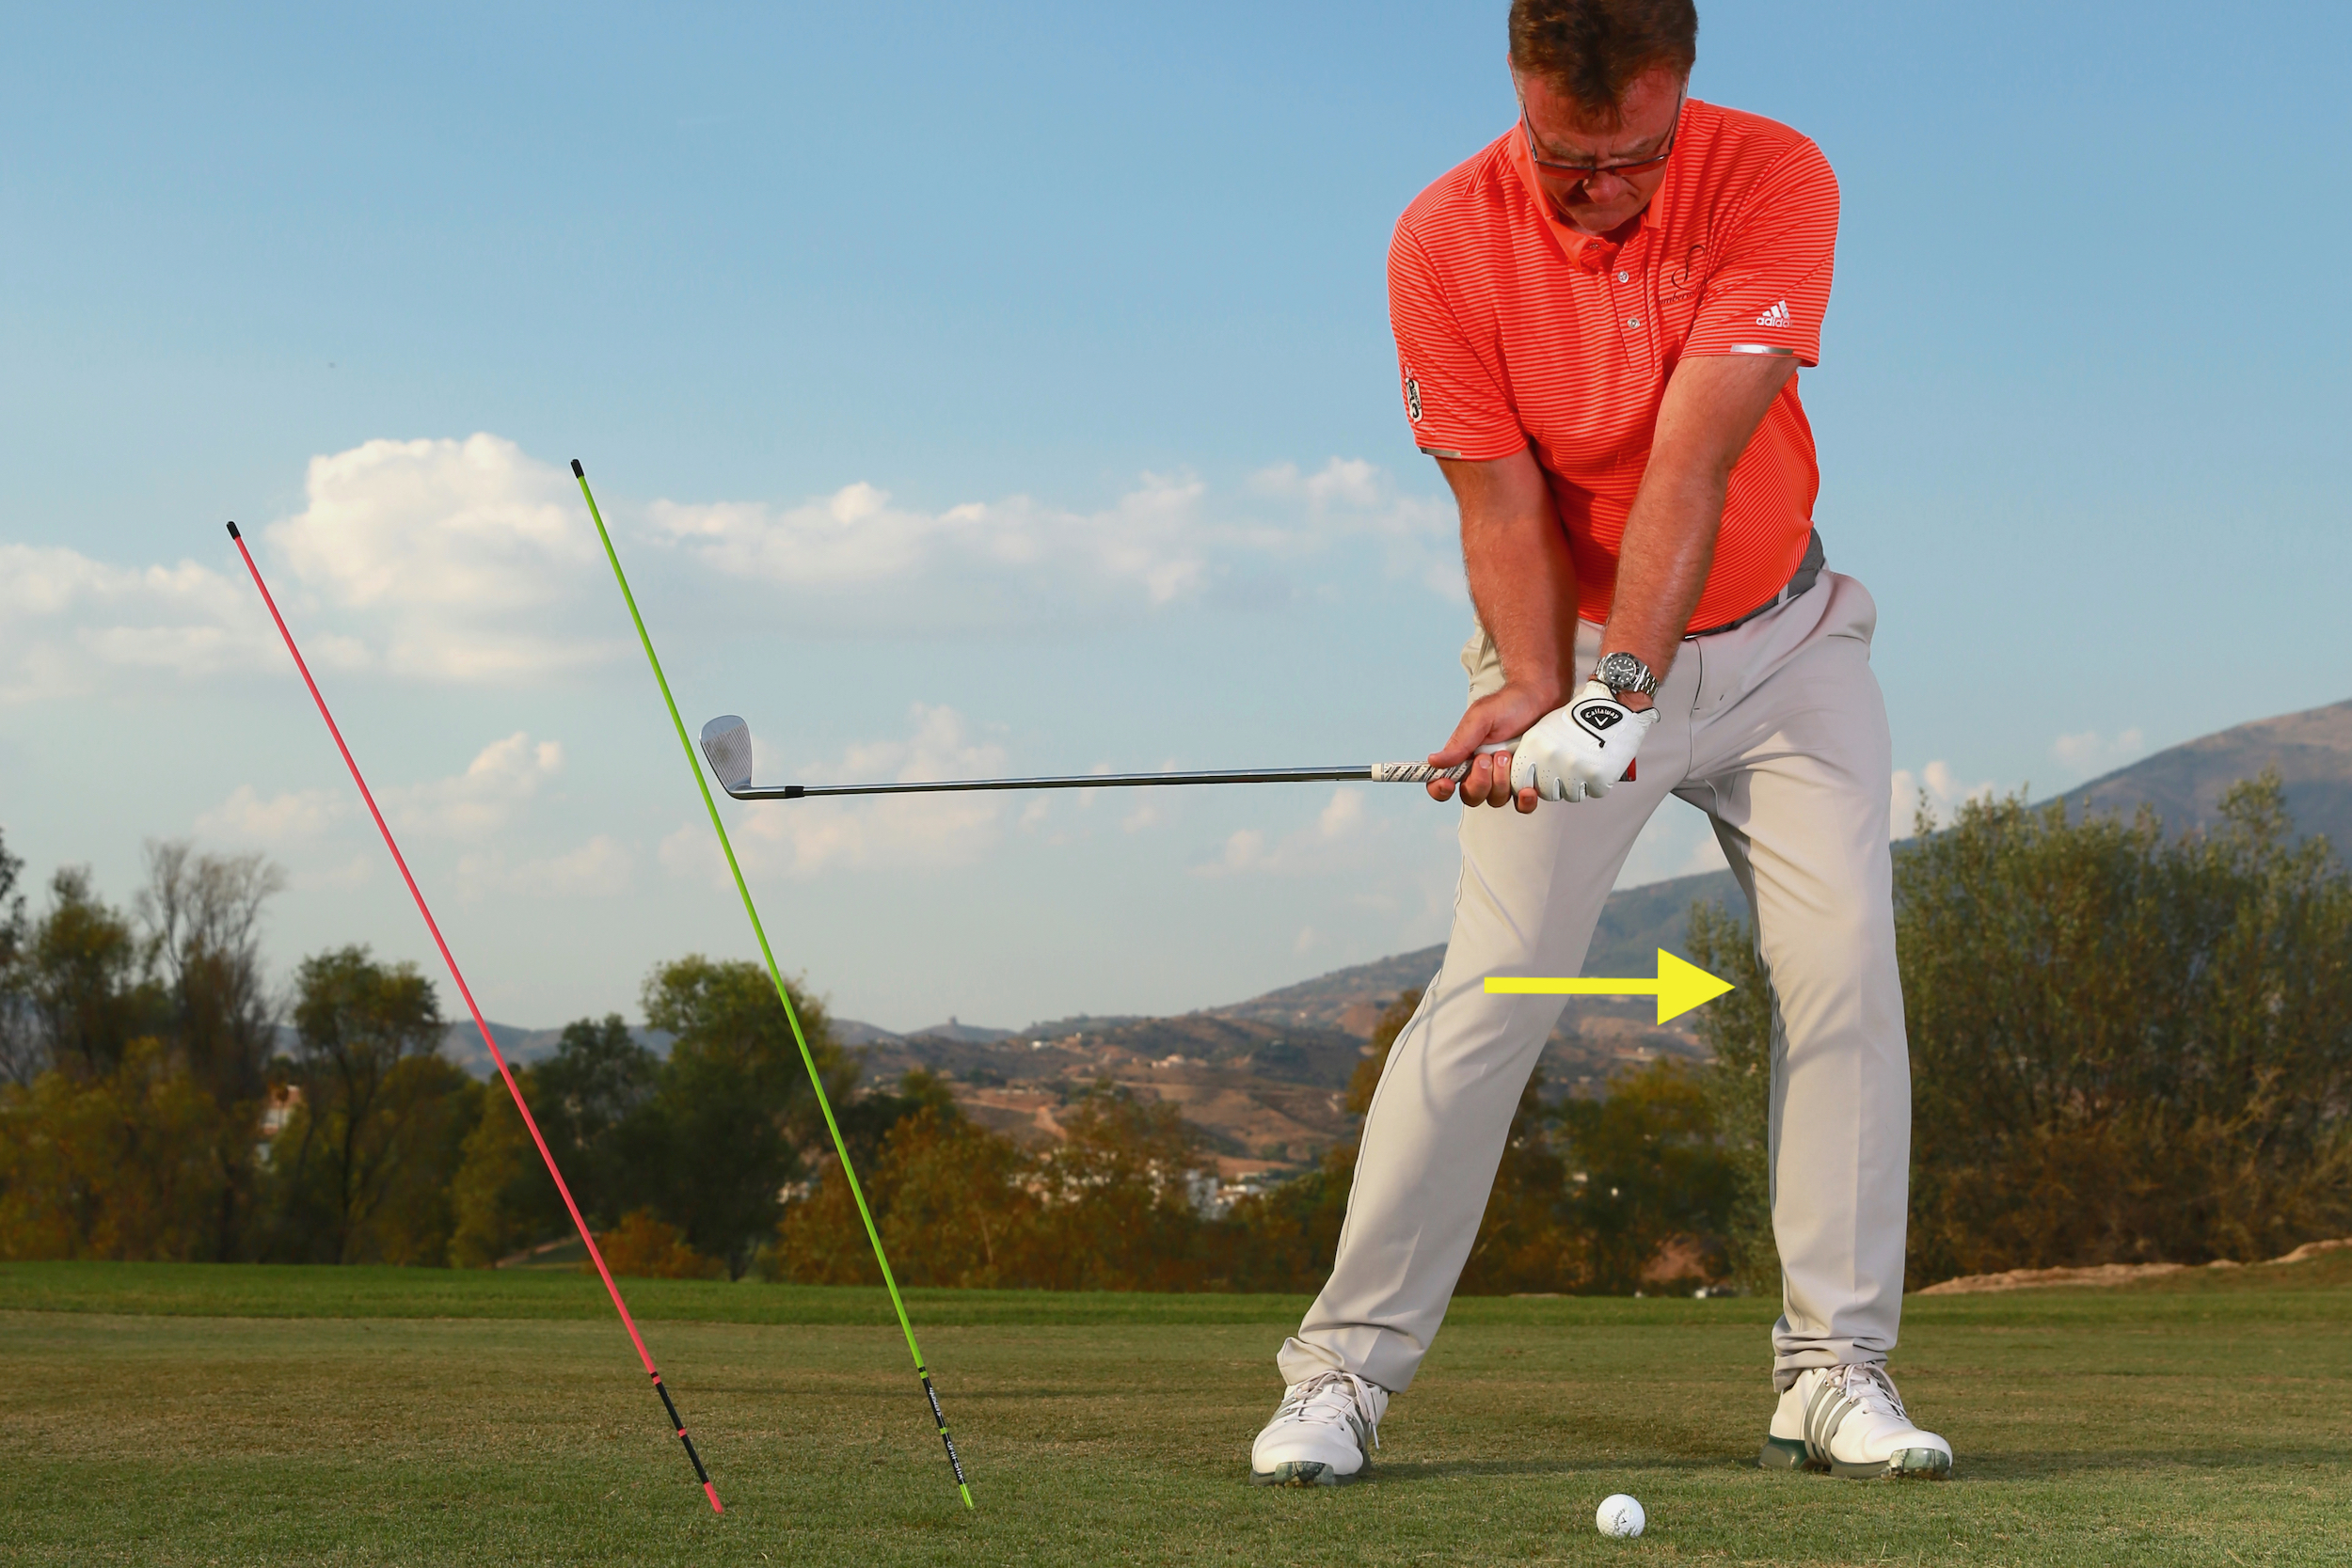 How to hit an iron - downswing